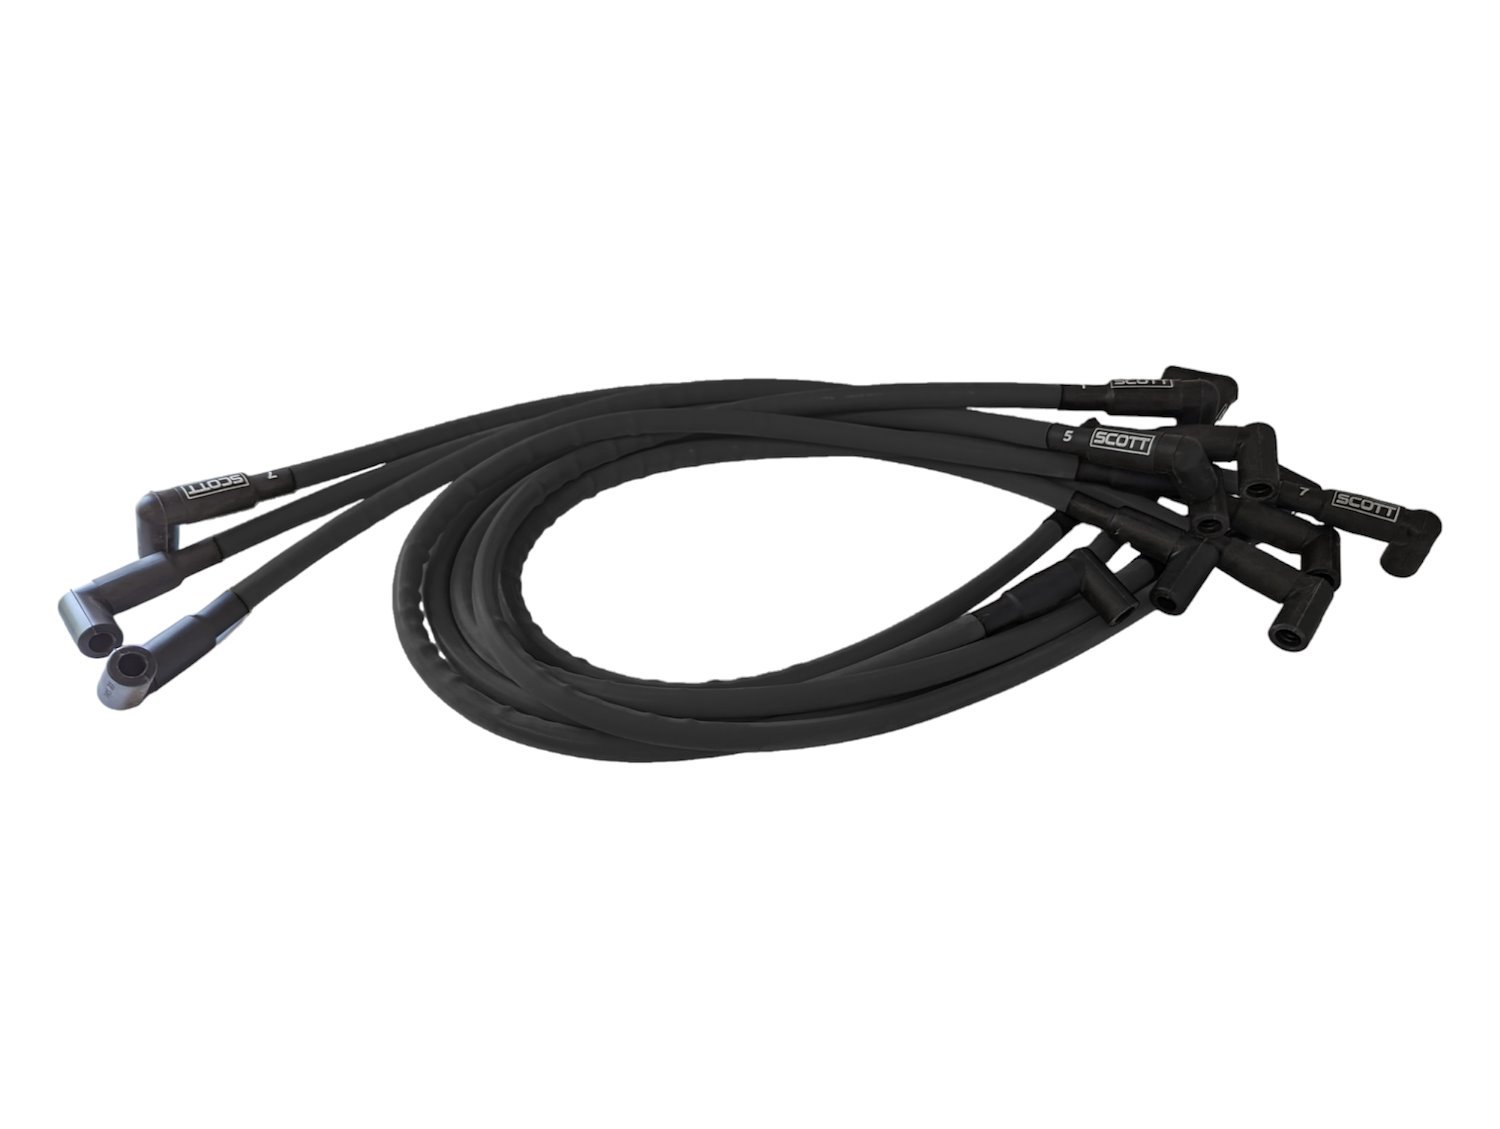 SPW-CH-407-1 High-Performance Silicone-Sleeved Spark Plug Wire Set for Small Block Chevy, Under Header [Black]